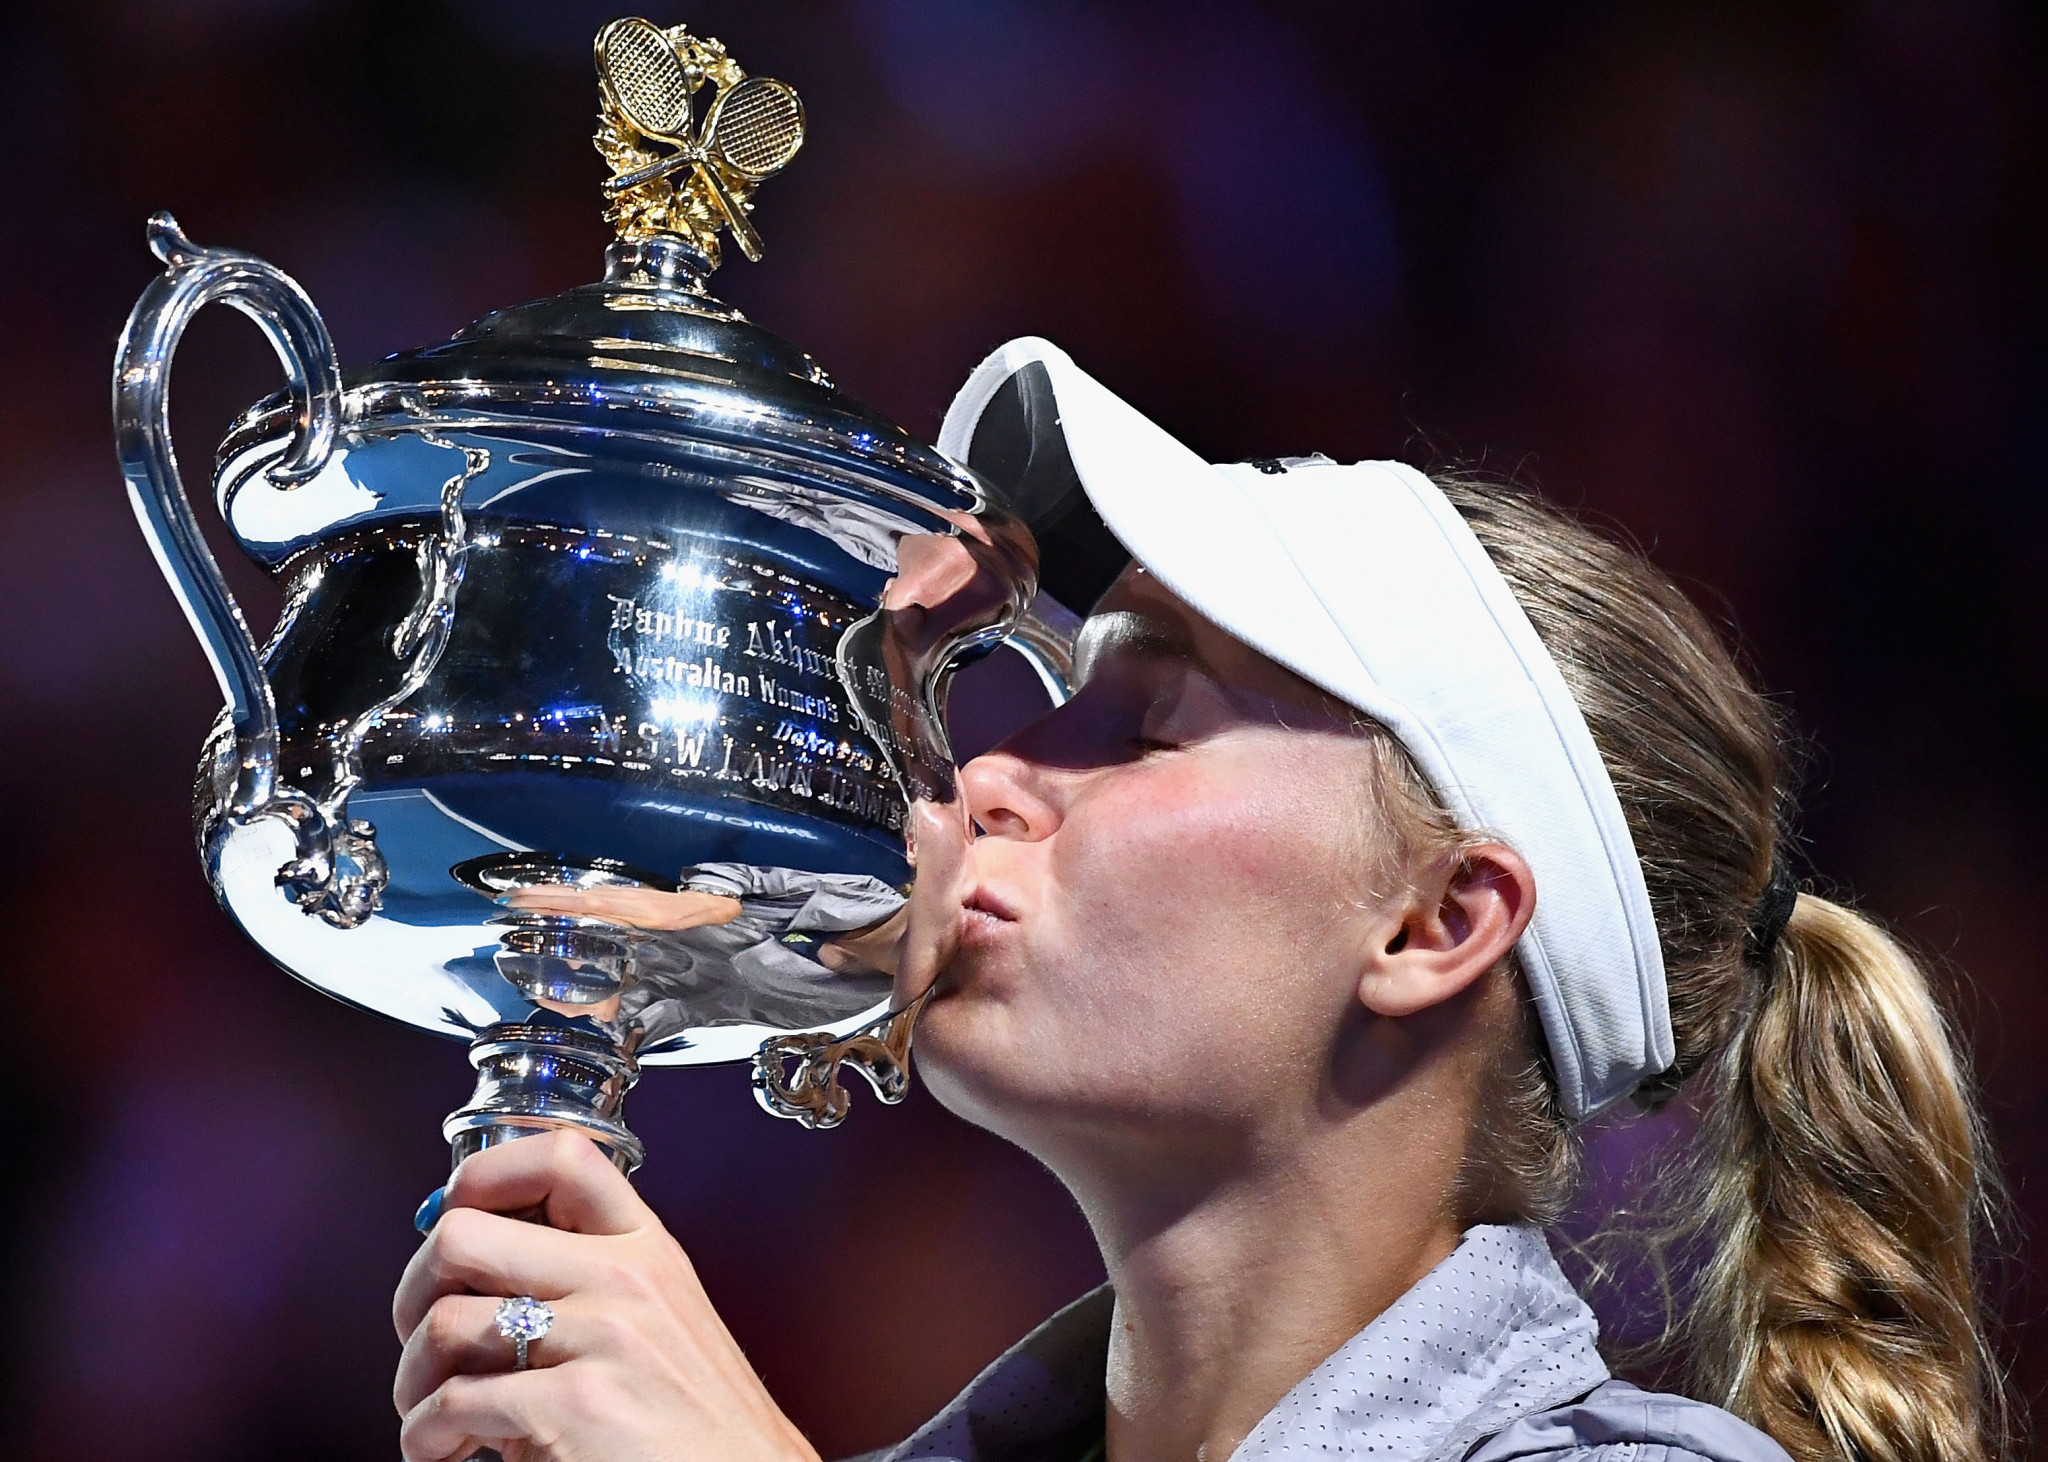 Caroline Wozniacki claimed the women's singles title at the Australian Open ©Getty Images